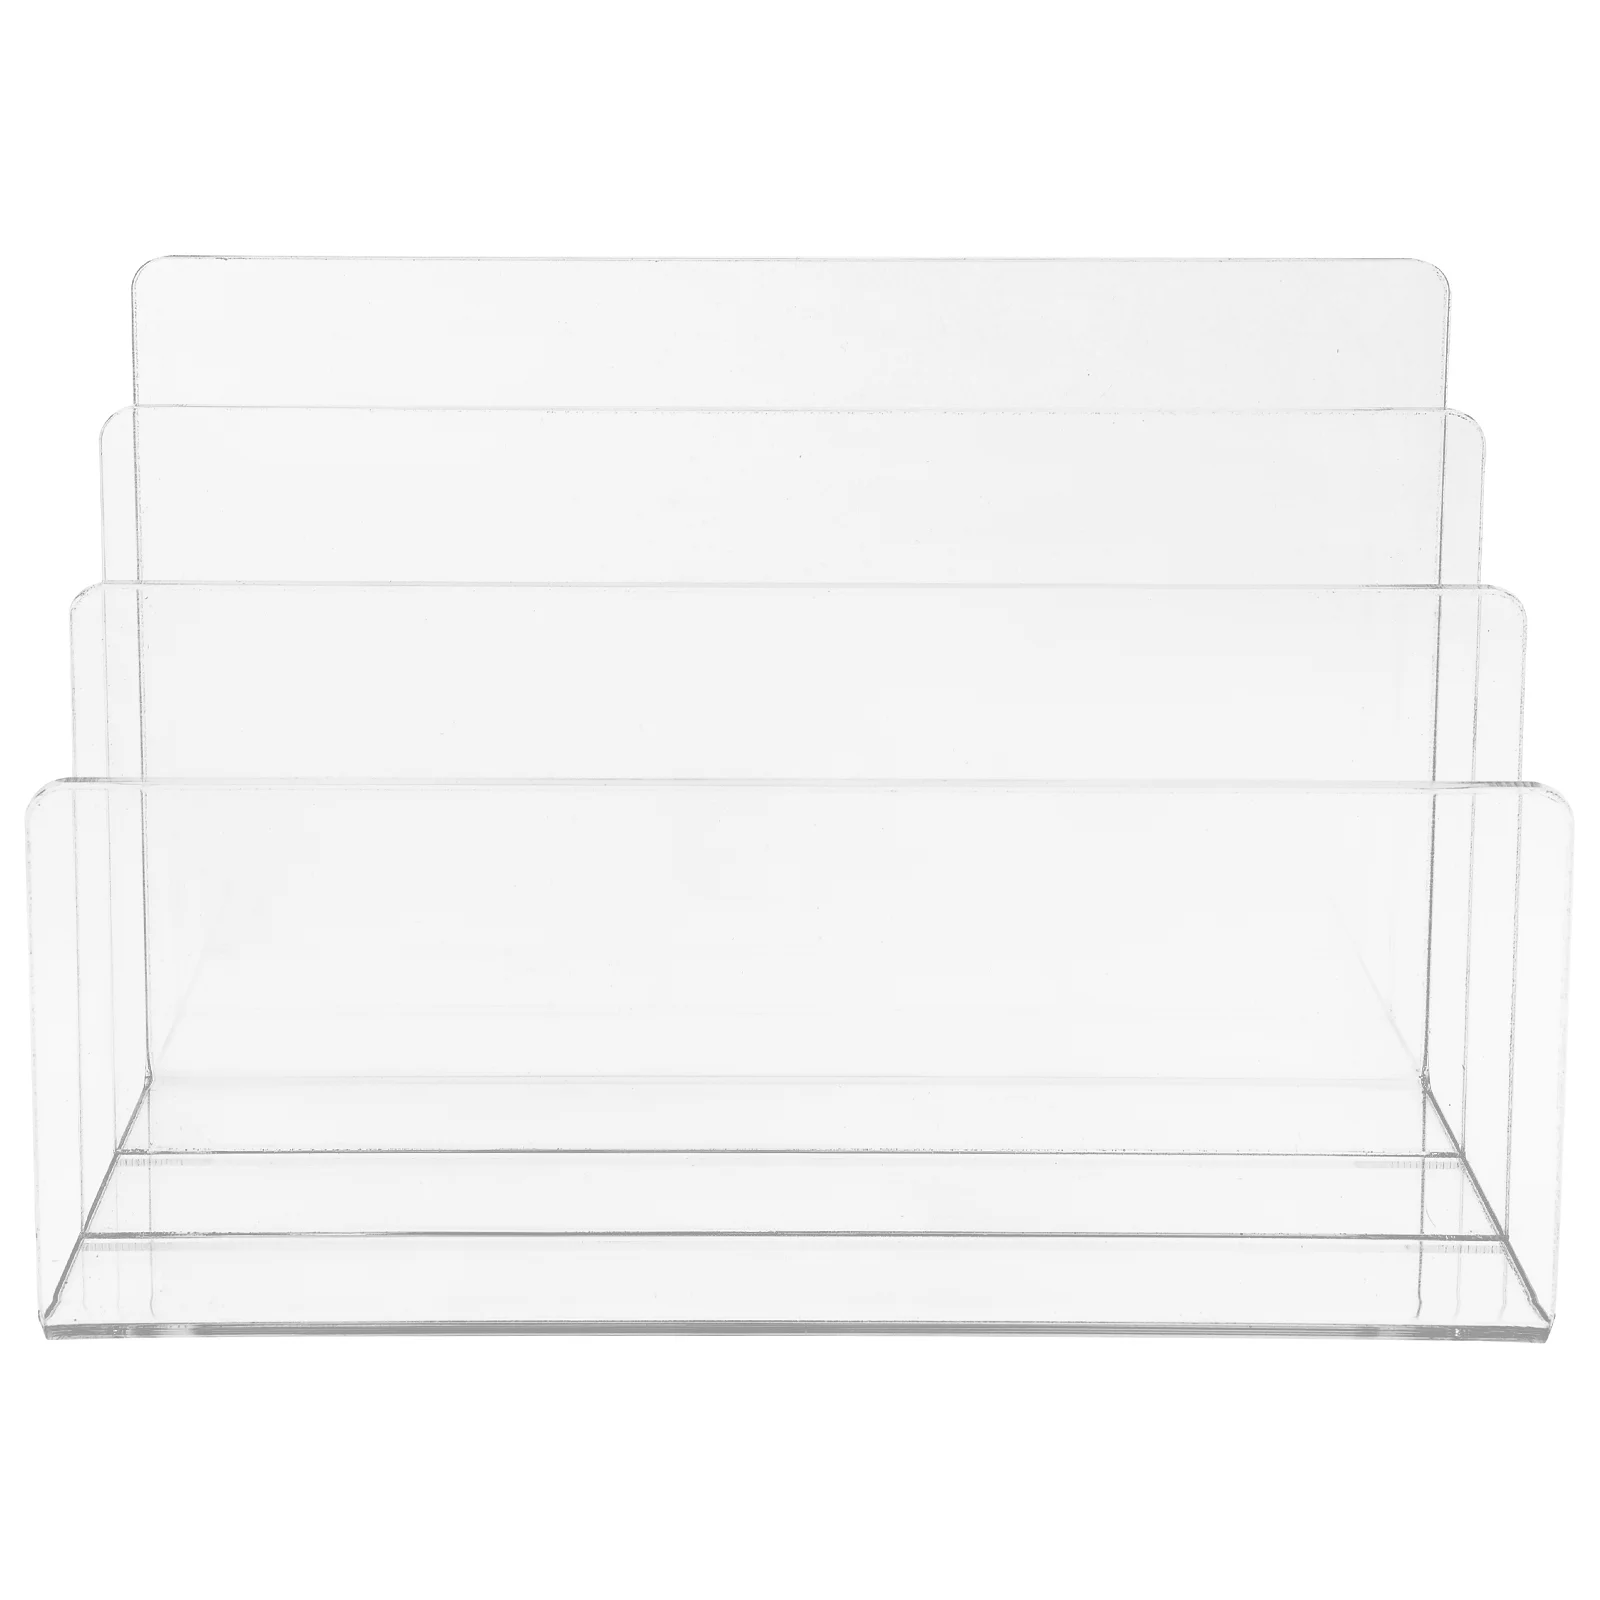 

Acrylic File Holder Desk Book Organizer Folder Office Bookend Table Multi-grid Clear Support for books